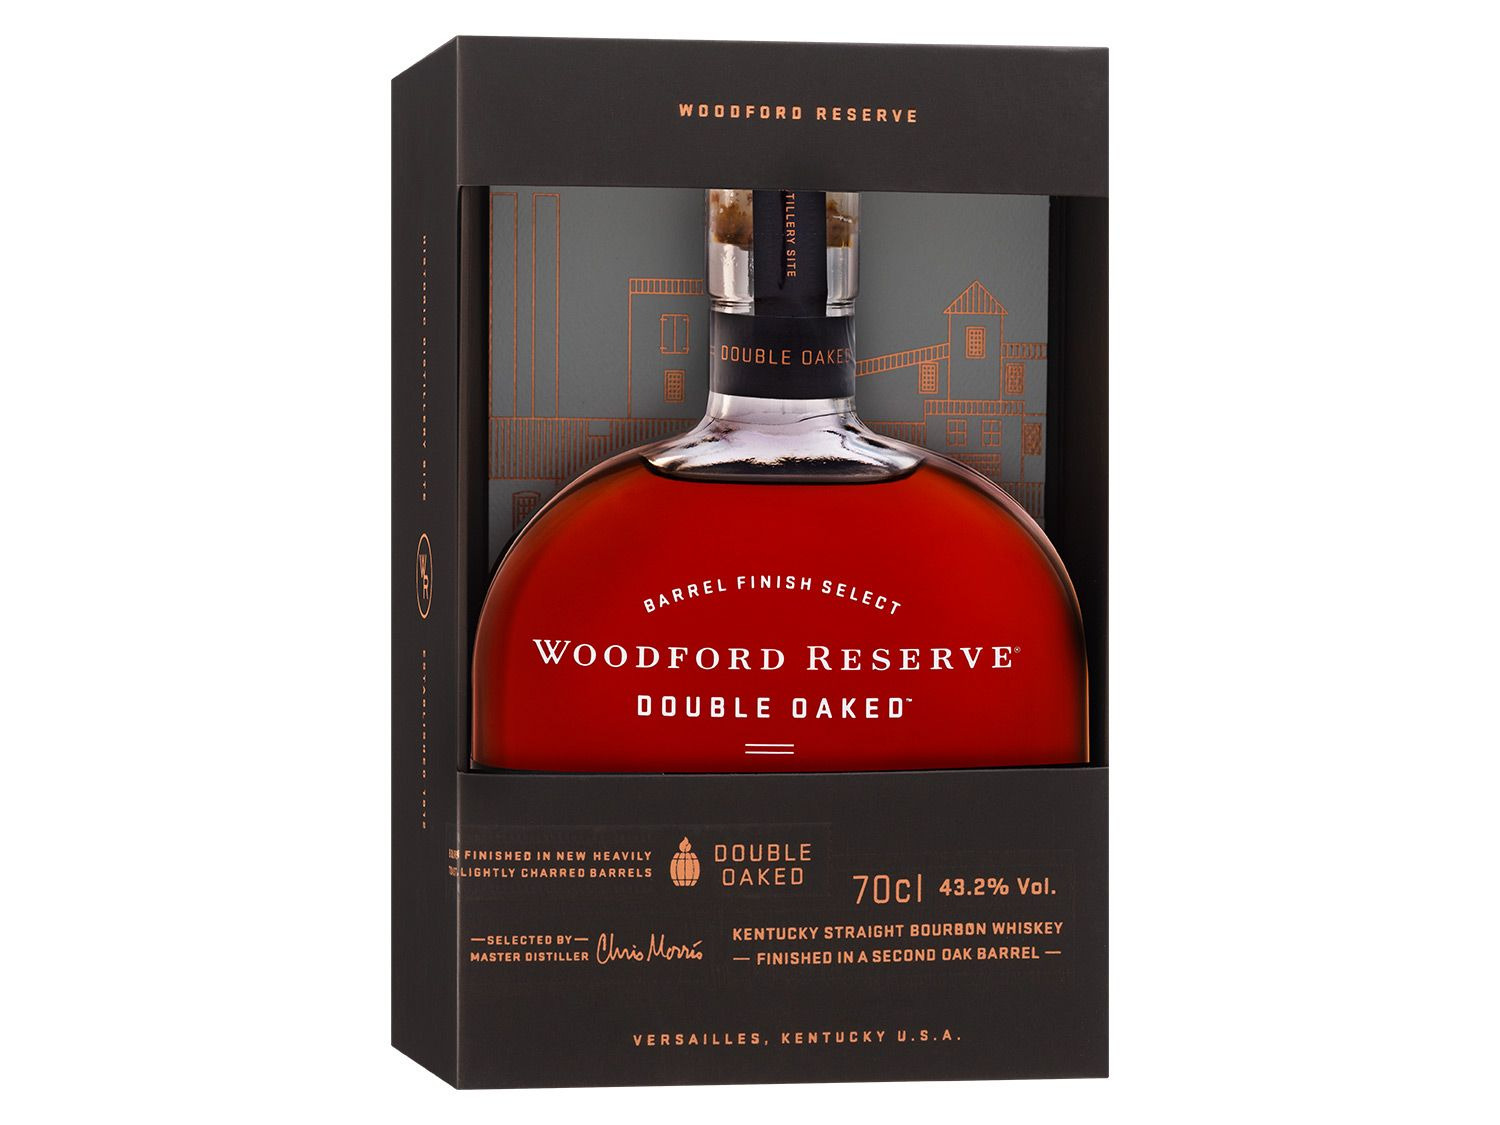 Woodford Reserve Double Oaked Kentucky Straight Bourbon Whiskey 43 2% Vol